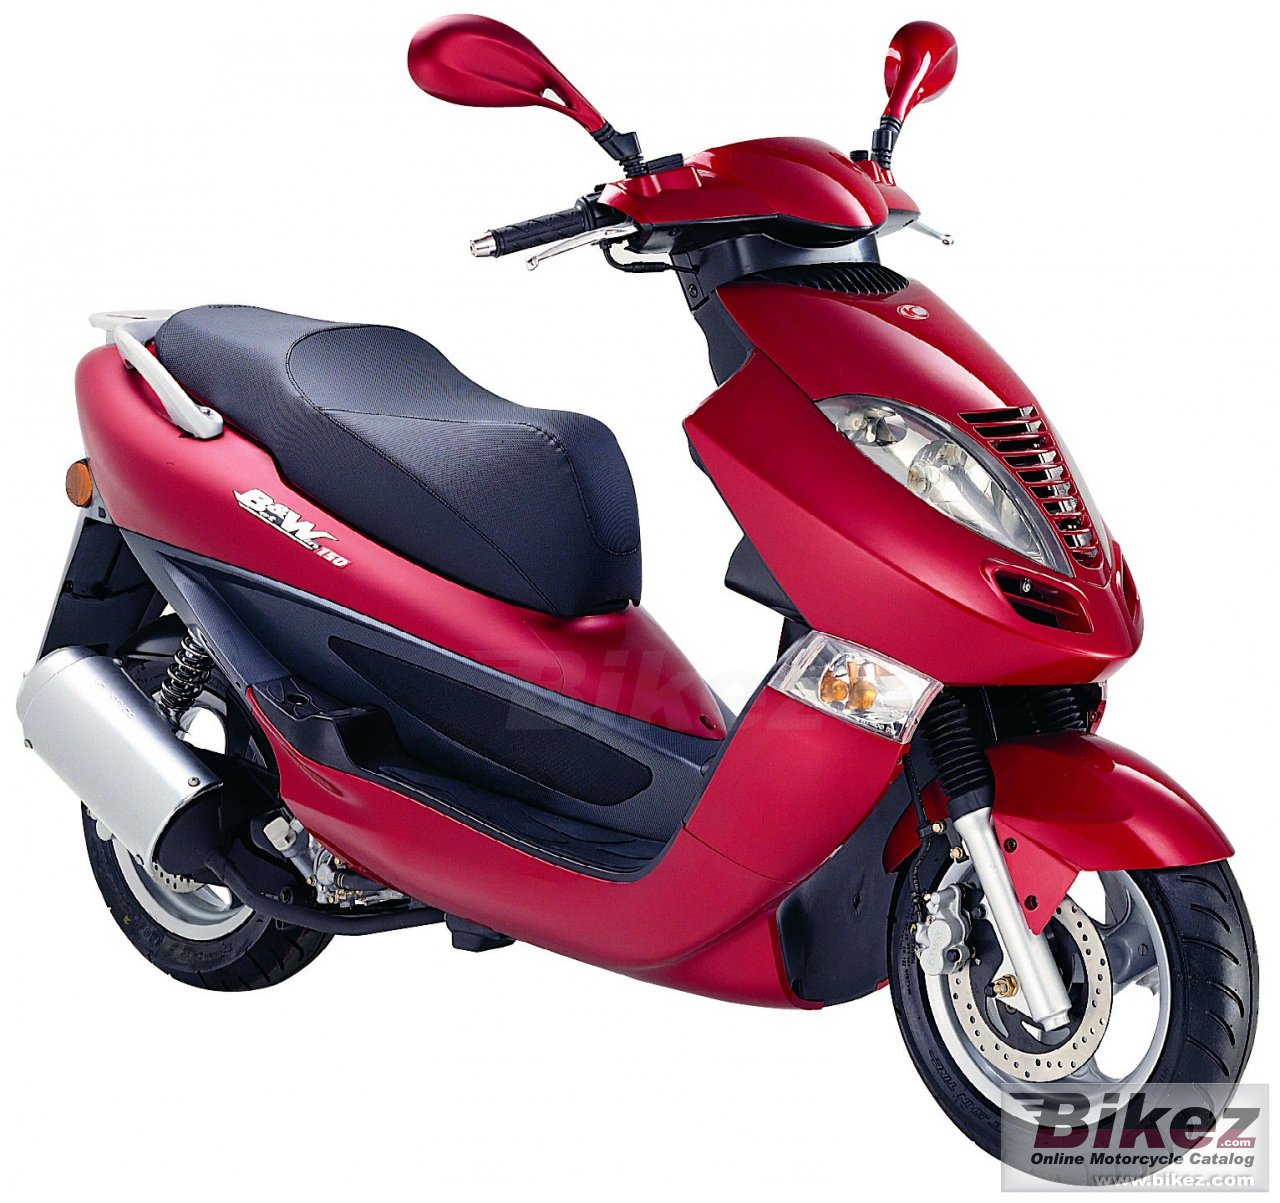 Kymco Bet and Win 150